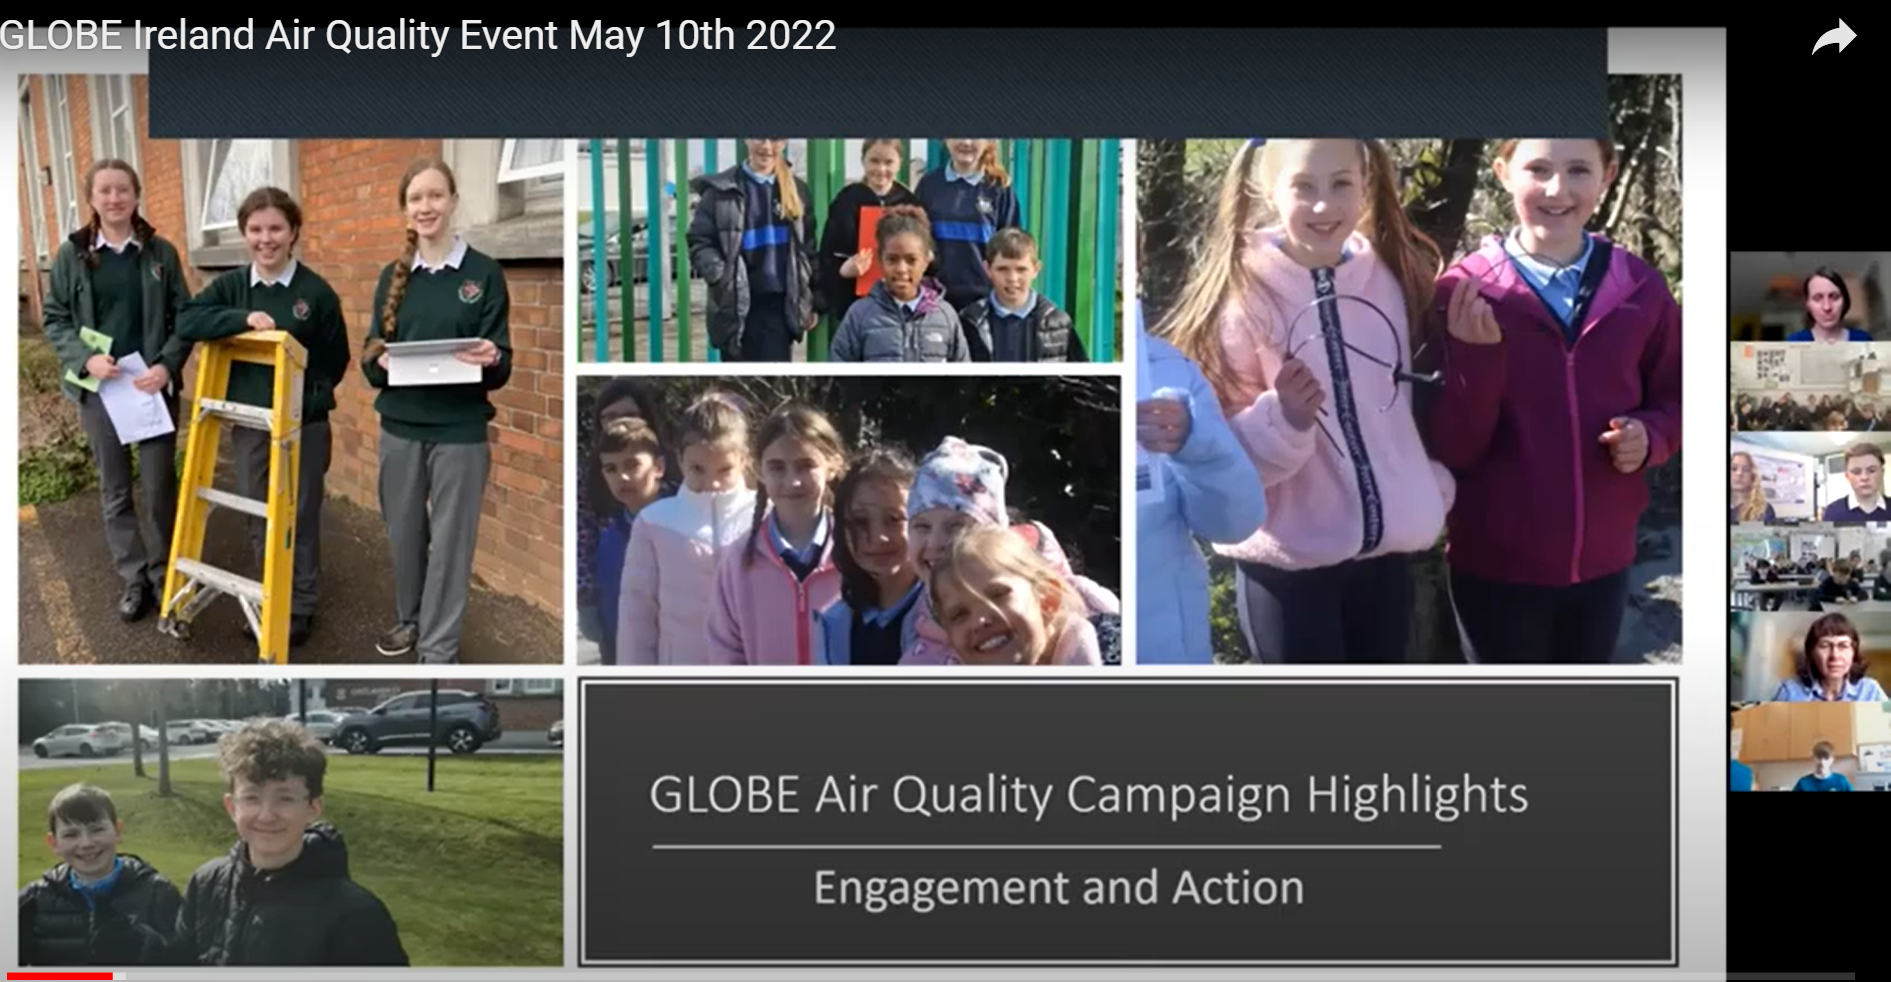 A screen shot of the Zoom meeting from the 10 May 2022 GLOBE Ireland Air Quality Campaign "End-of-Year" Event highlighting students participating in the campaign